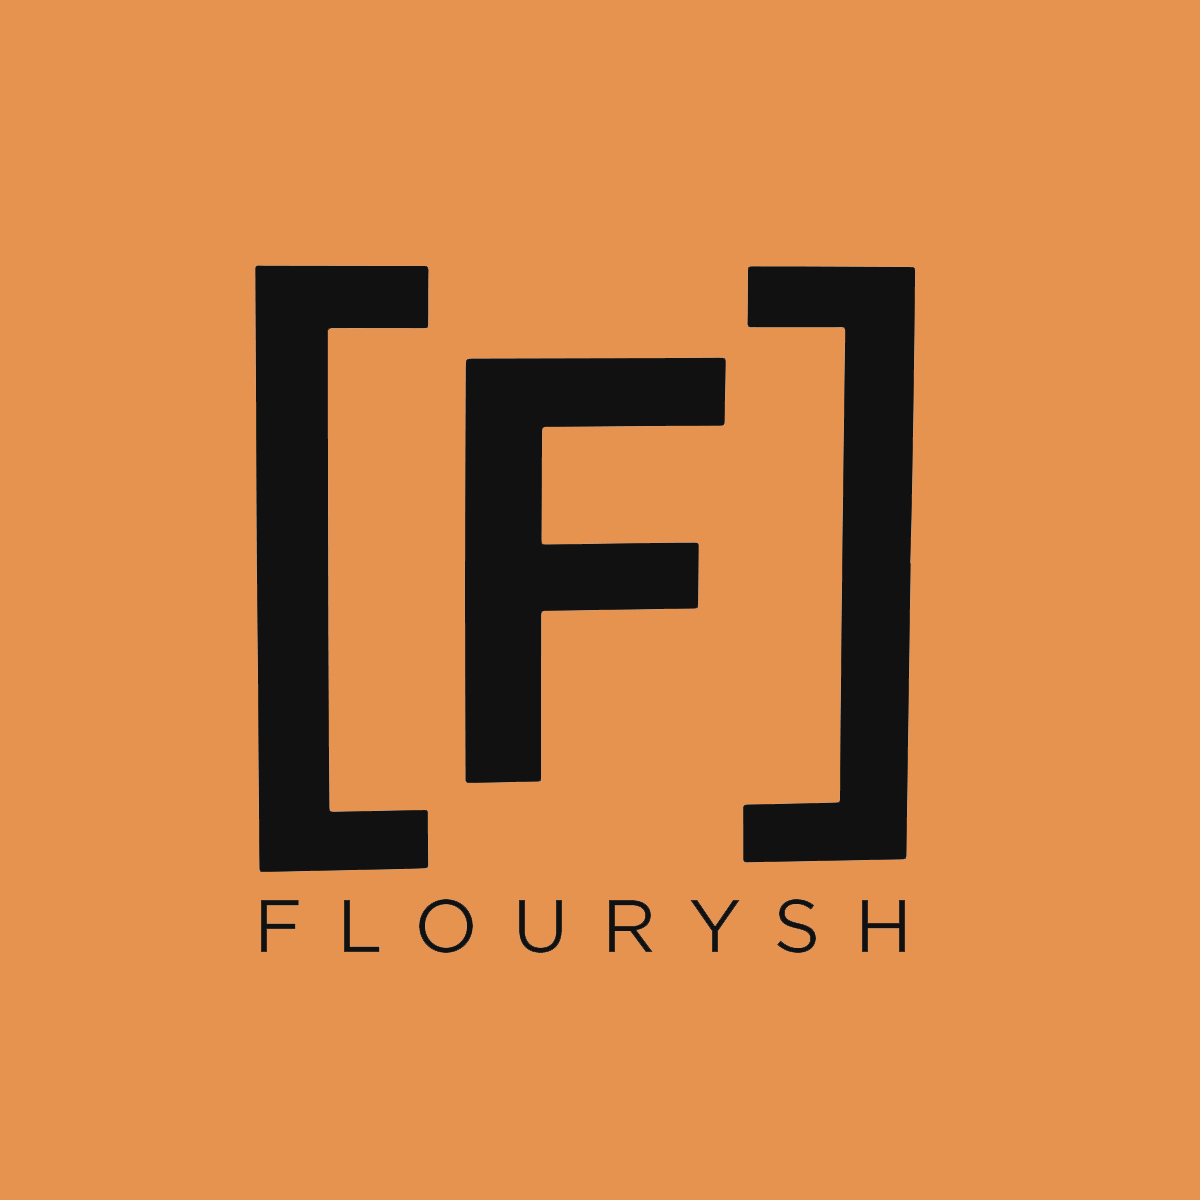 Meet The Entrepreneurs On a Mission To Help Black-Owned Businesses ‘Flourysh’